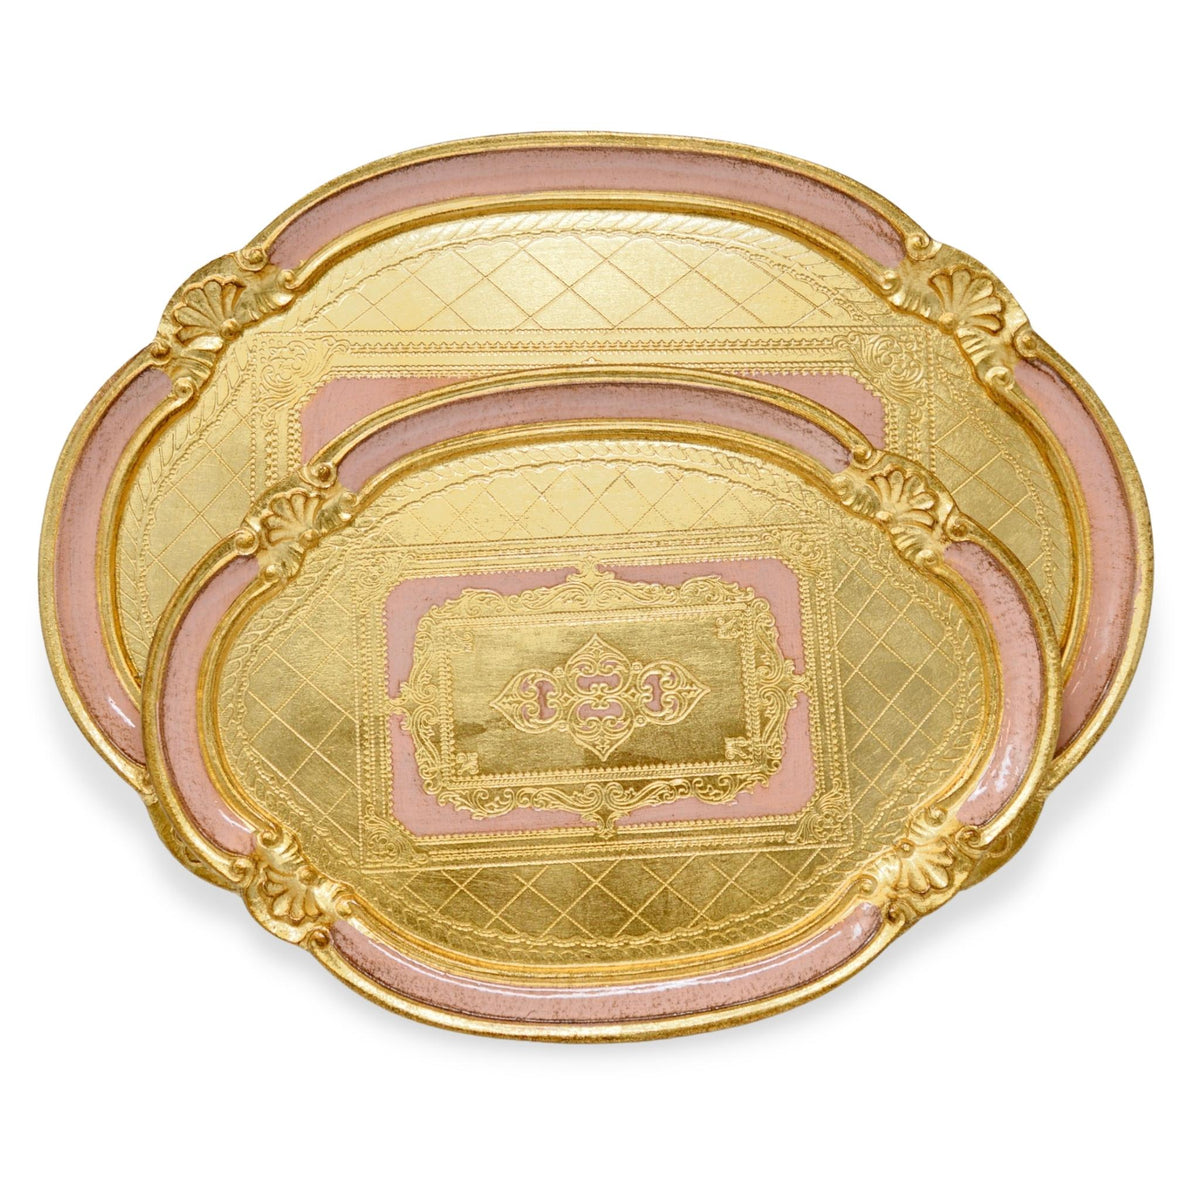 Florentine Oval Carved Wood Trays, Set of 2, Pink, Made in Italy - My Italian Decor